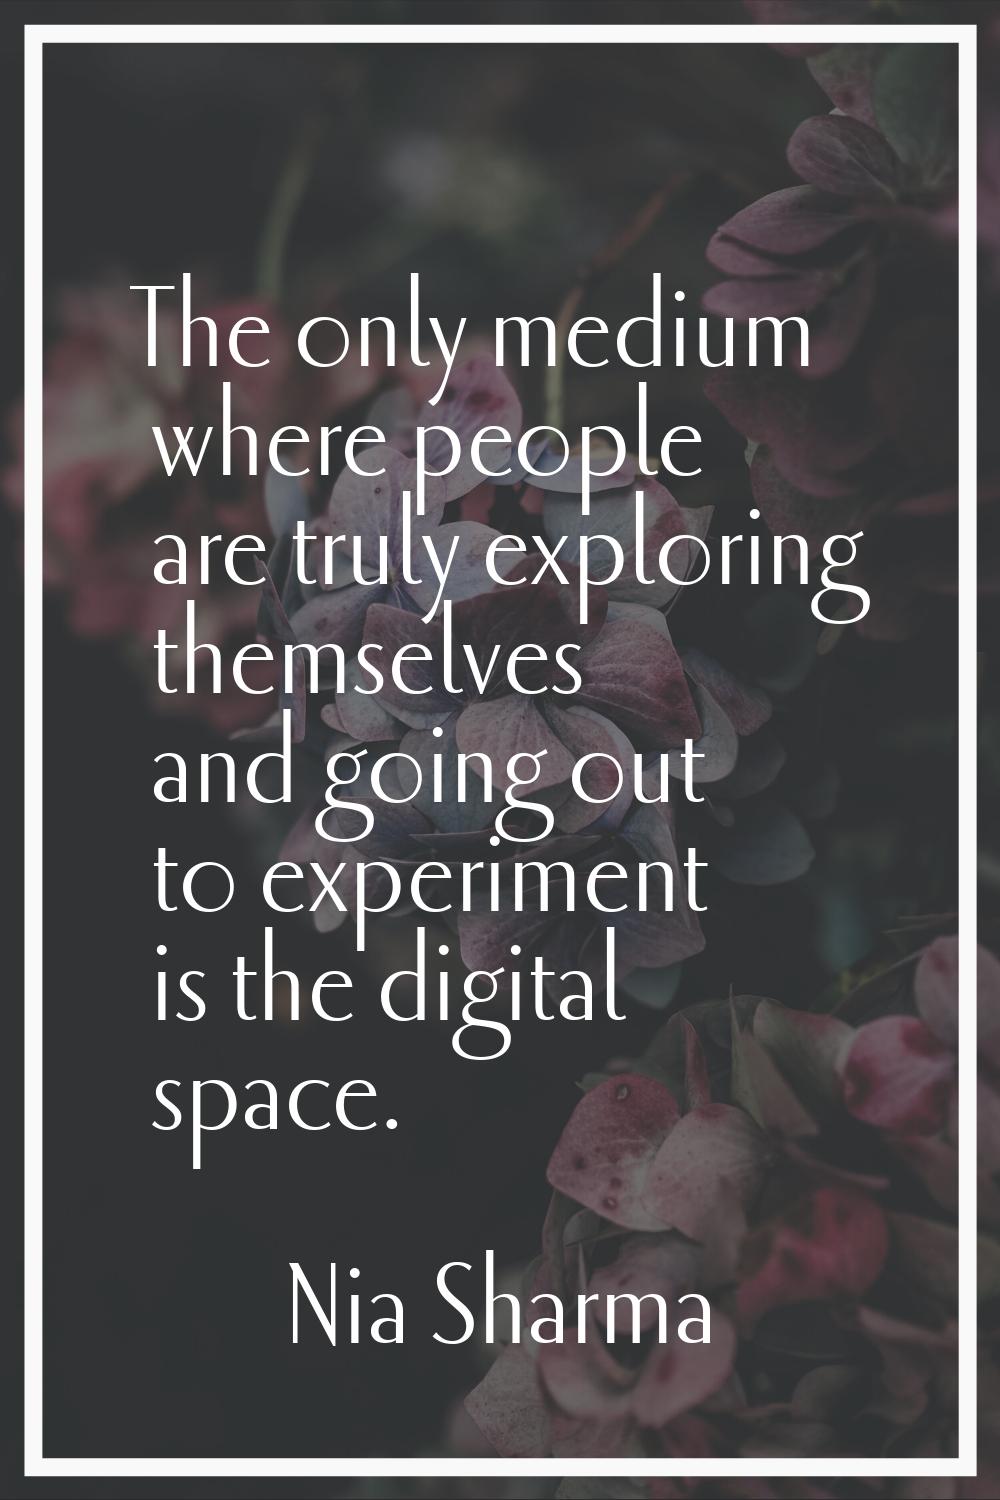 The only medium where people are truly exploring themselves and going out to experiment is the digi